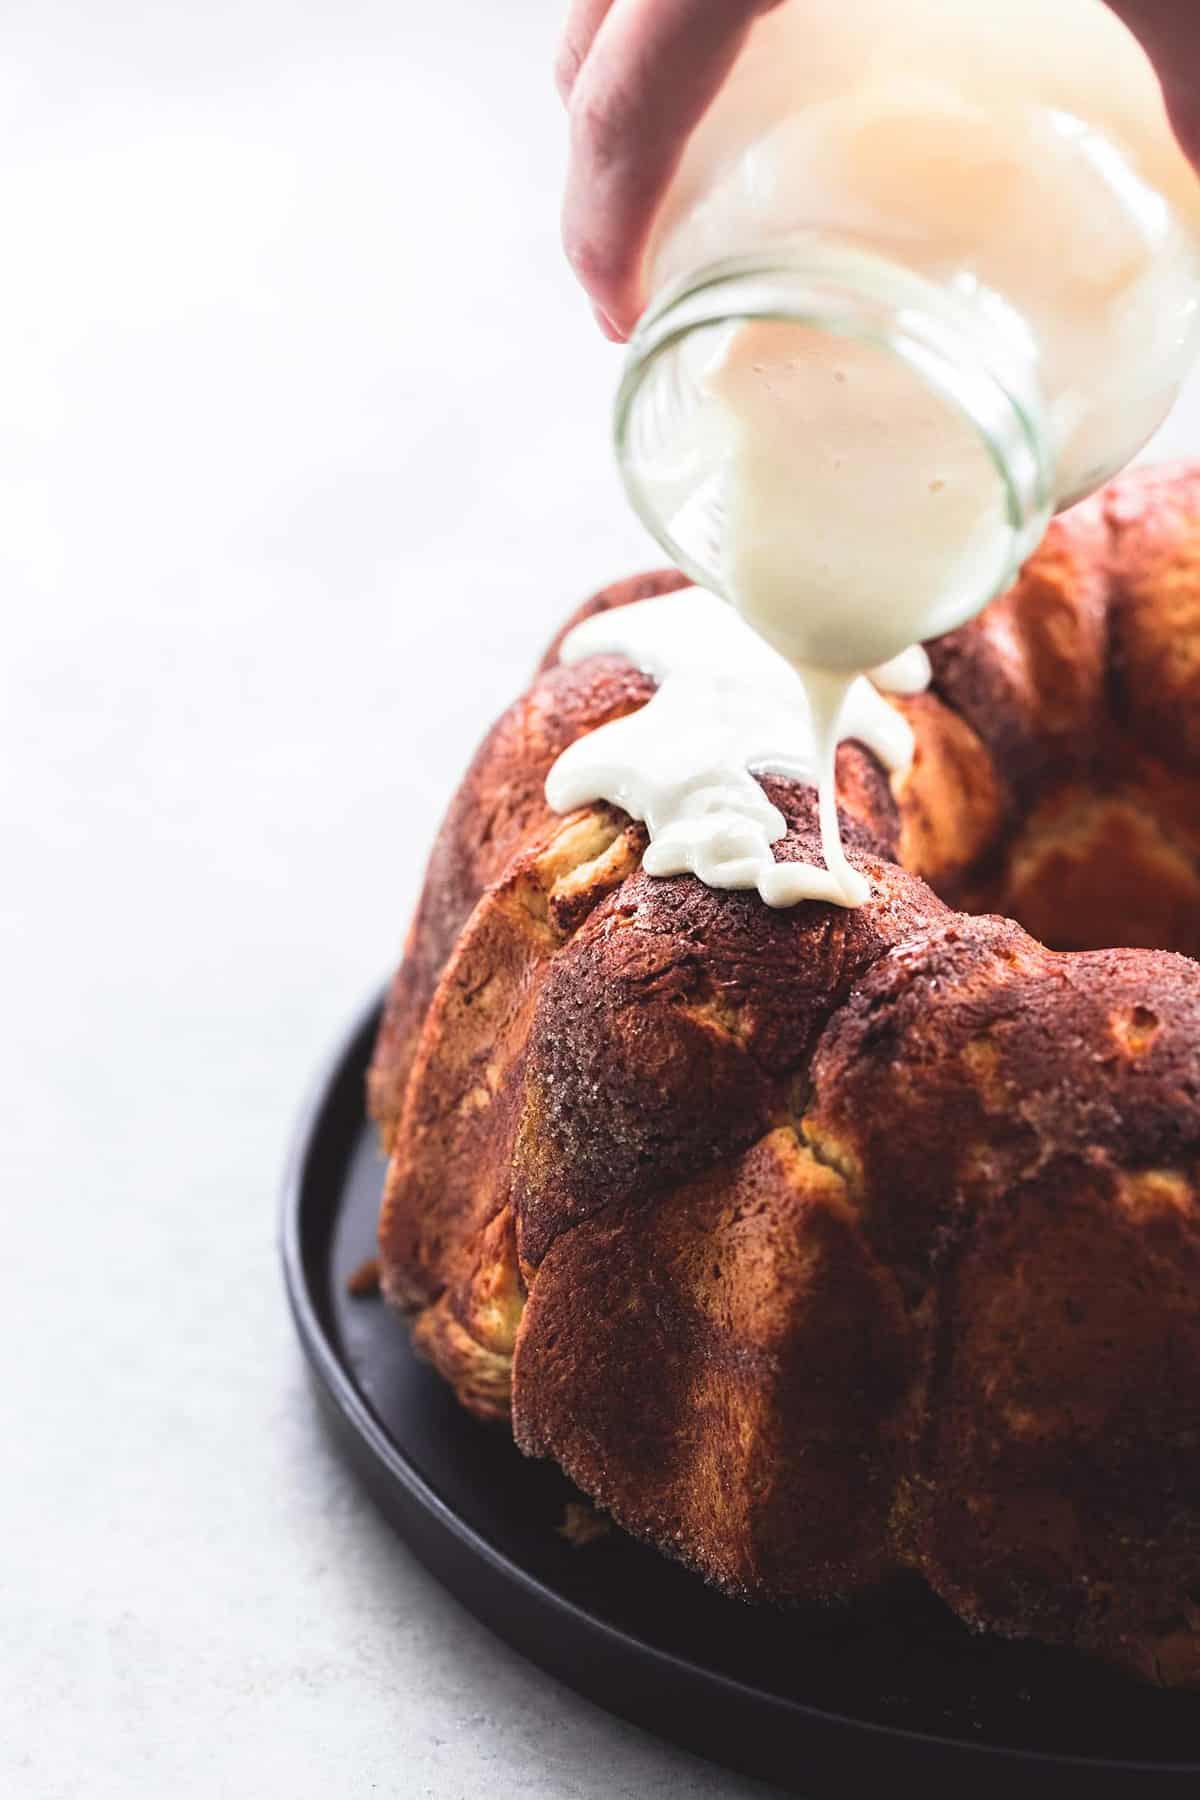 cinnamon swirl monkey bread with glaze being poured on top from a jar.